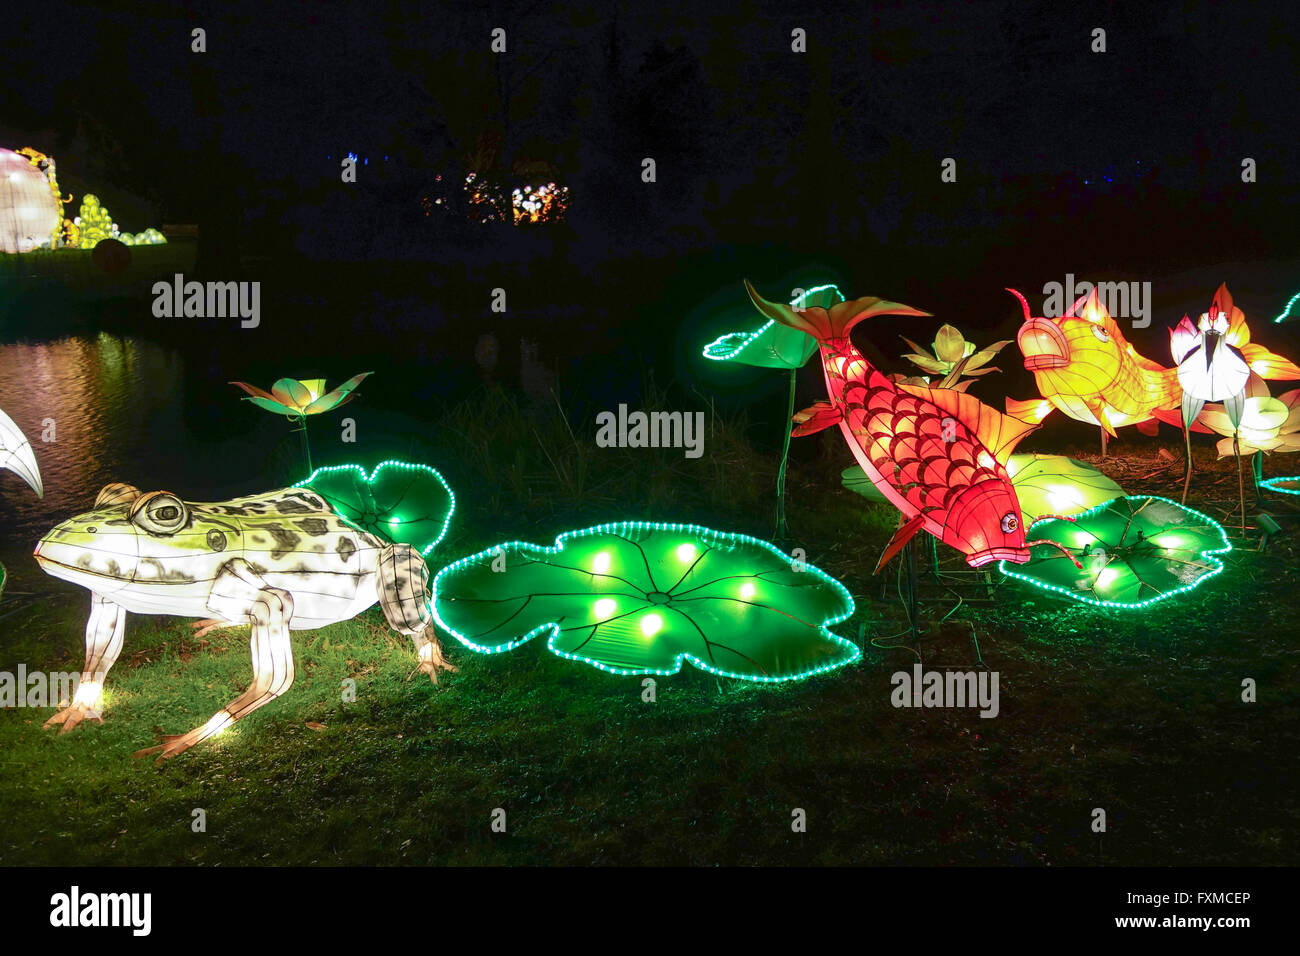 Magical Lantern Festival celebrates the Year of the Monkey at Chiswick Park in London. Stock Photo